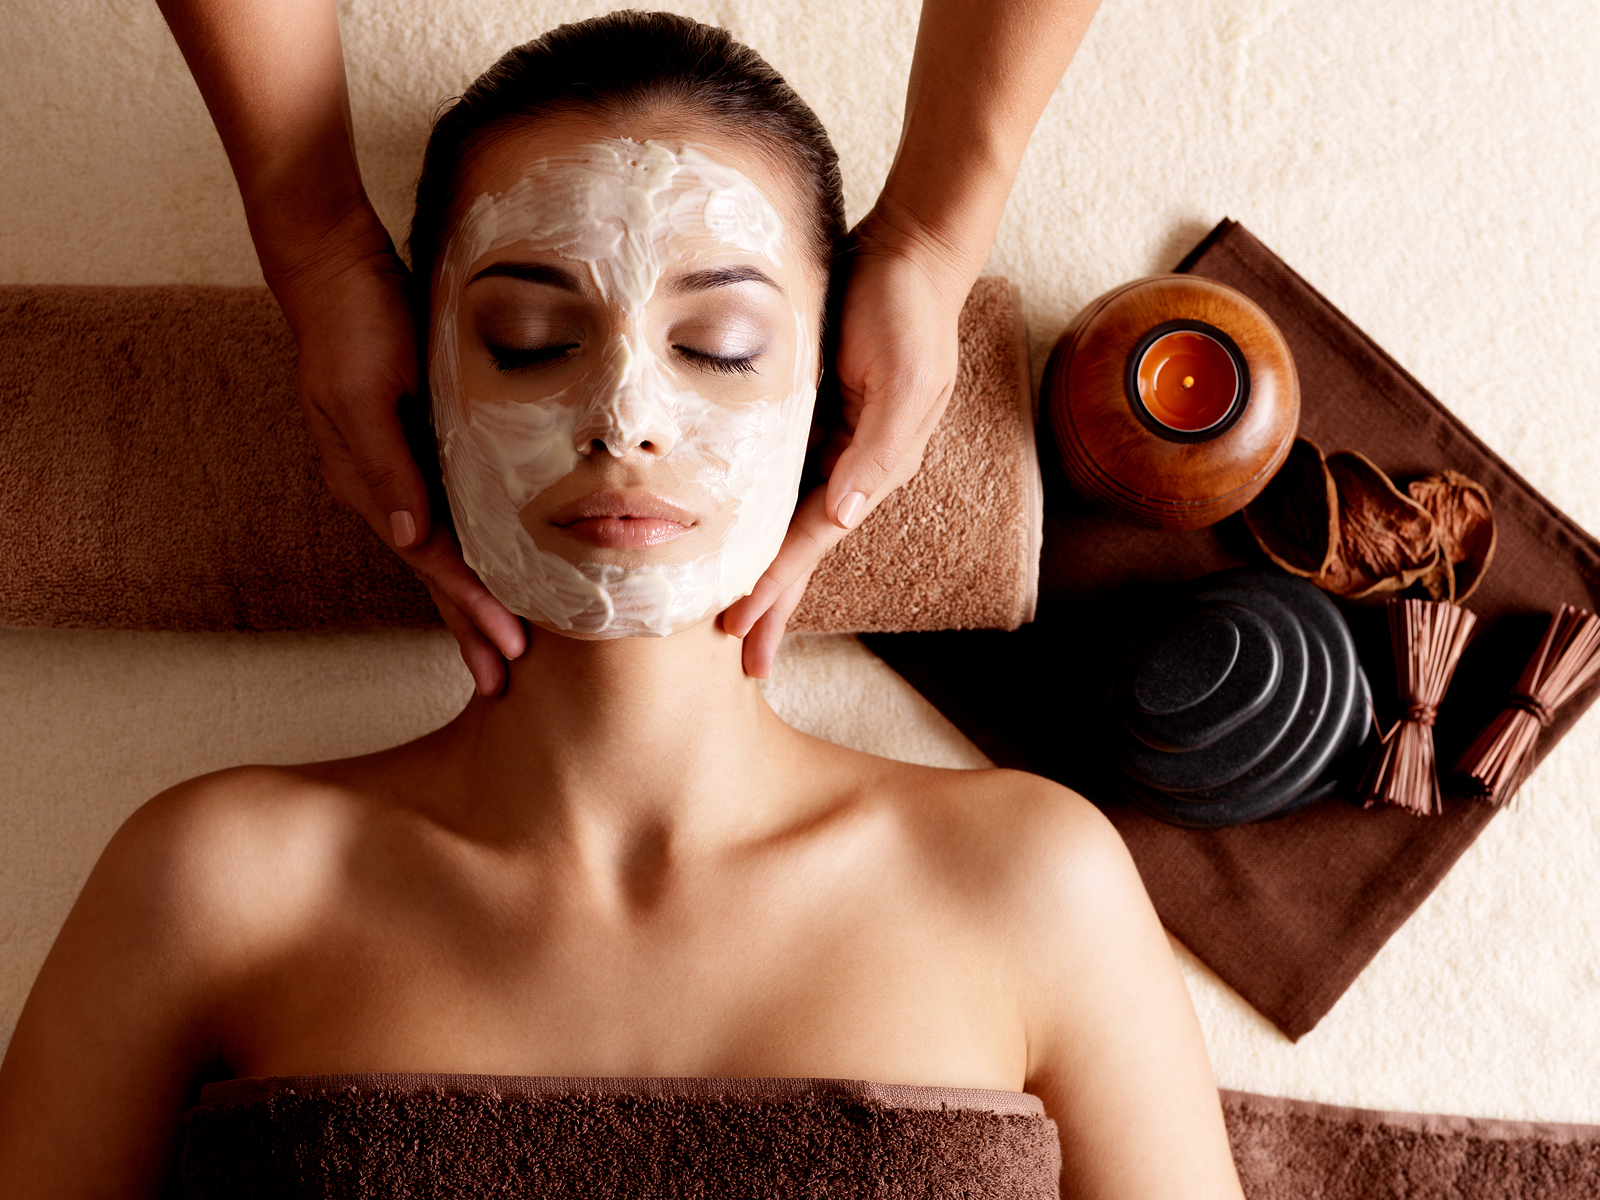 Bigstock-43524497-Spa-massage-for-young-woman-with-facial-mask-on-face-indoors.jpg